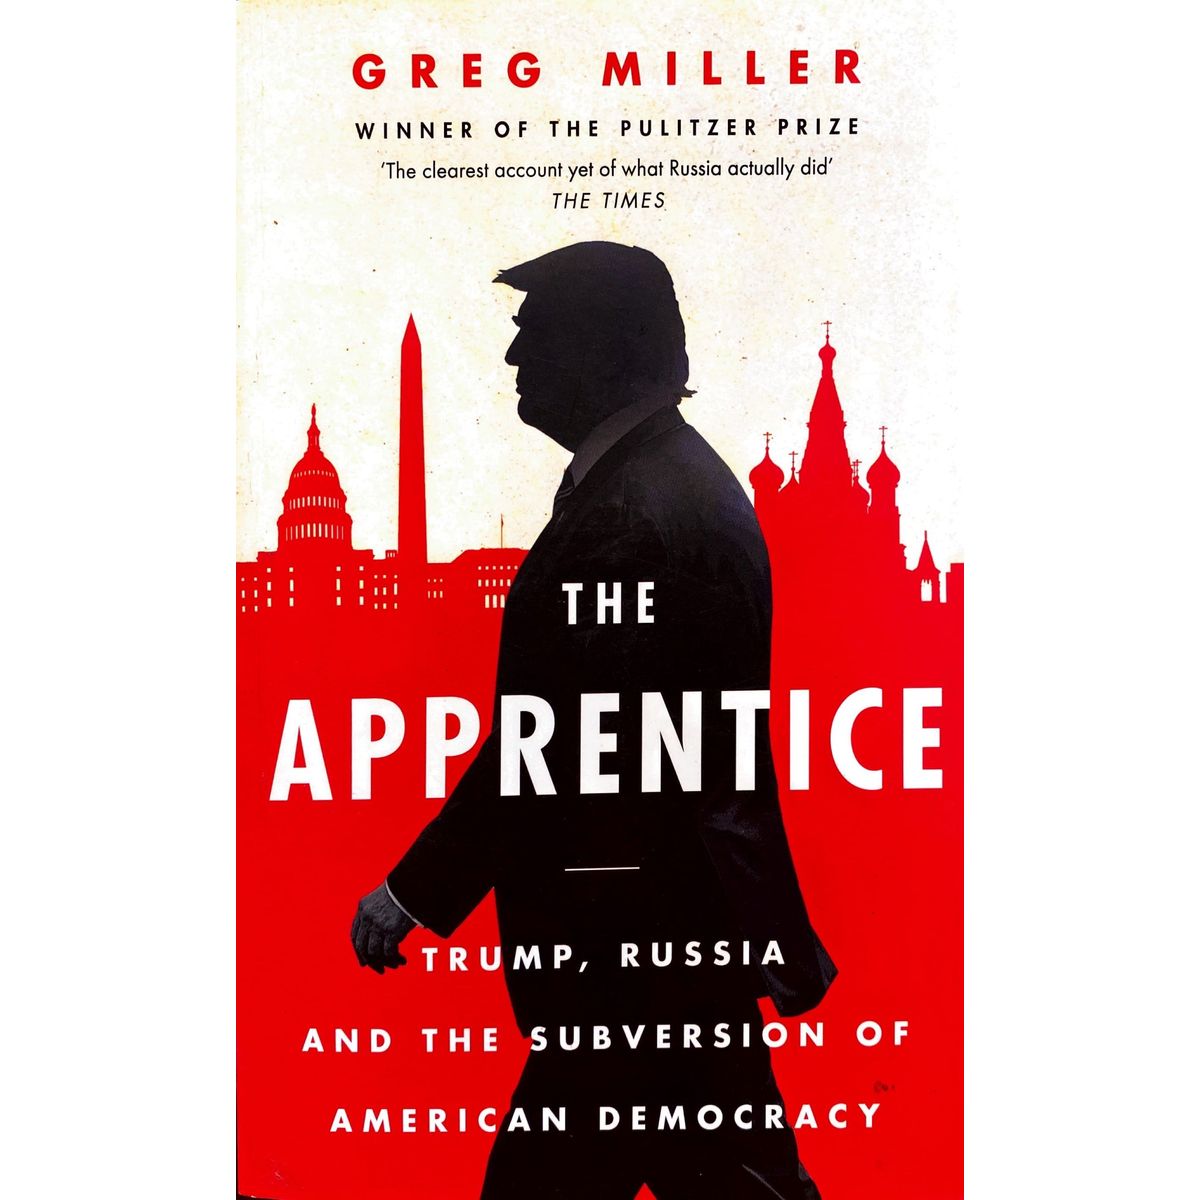 ISBN: 9780008325787 / 0008325782 - The Apprentice: Trump, Russia and the Subversion of American Democracy by Greg Miller [2020]